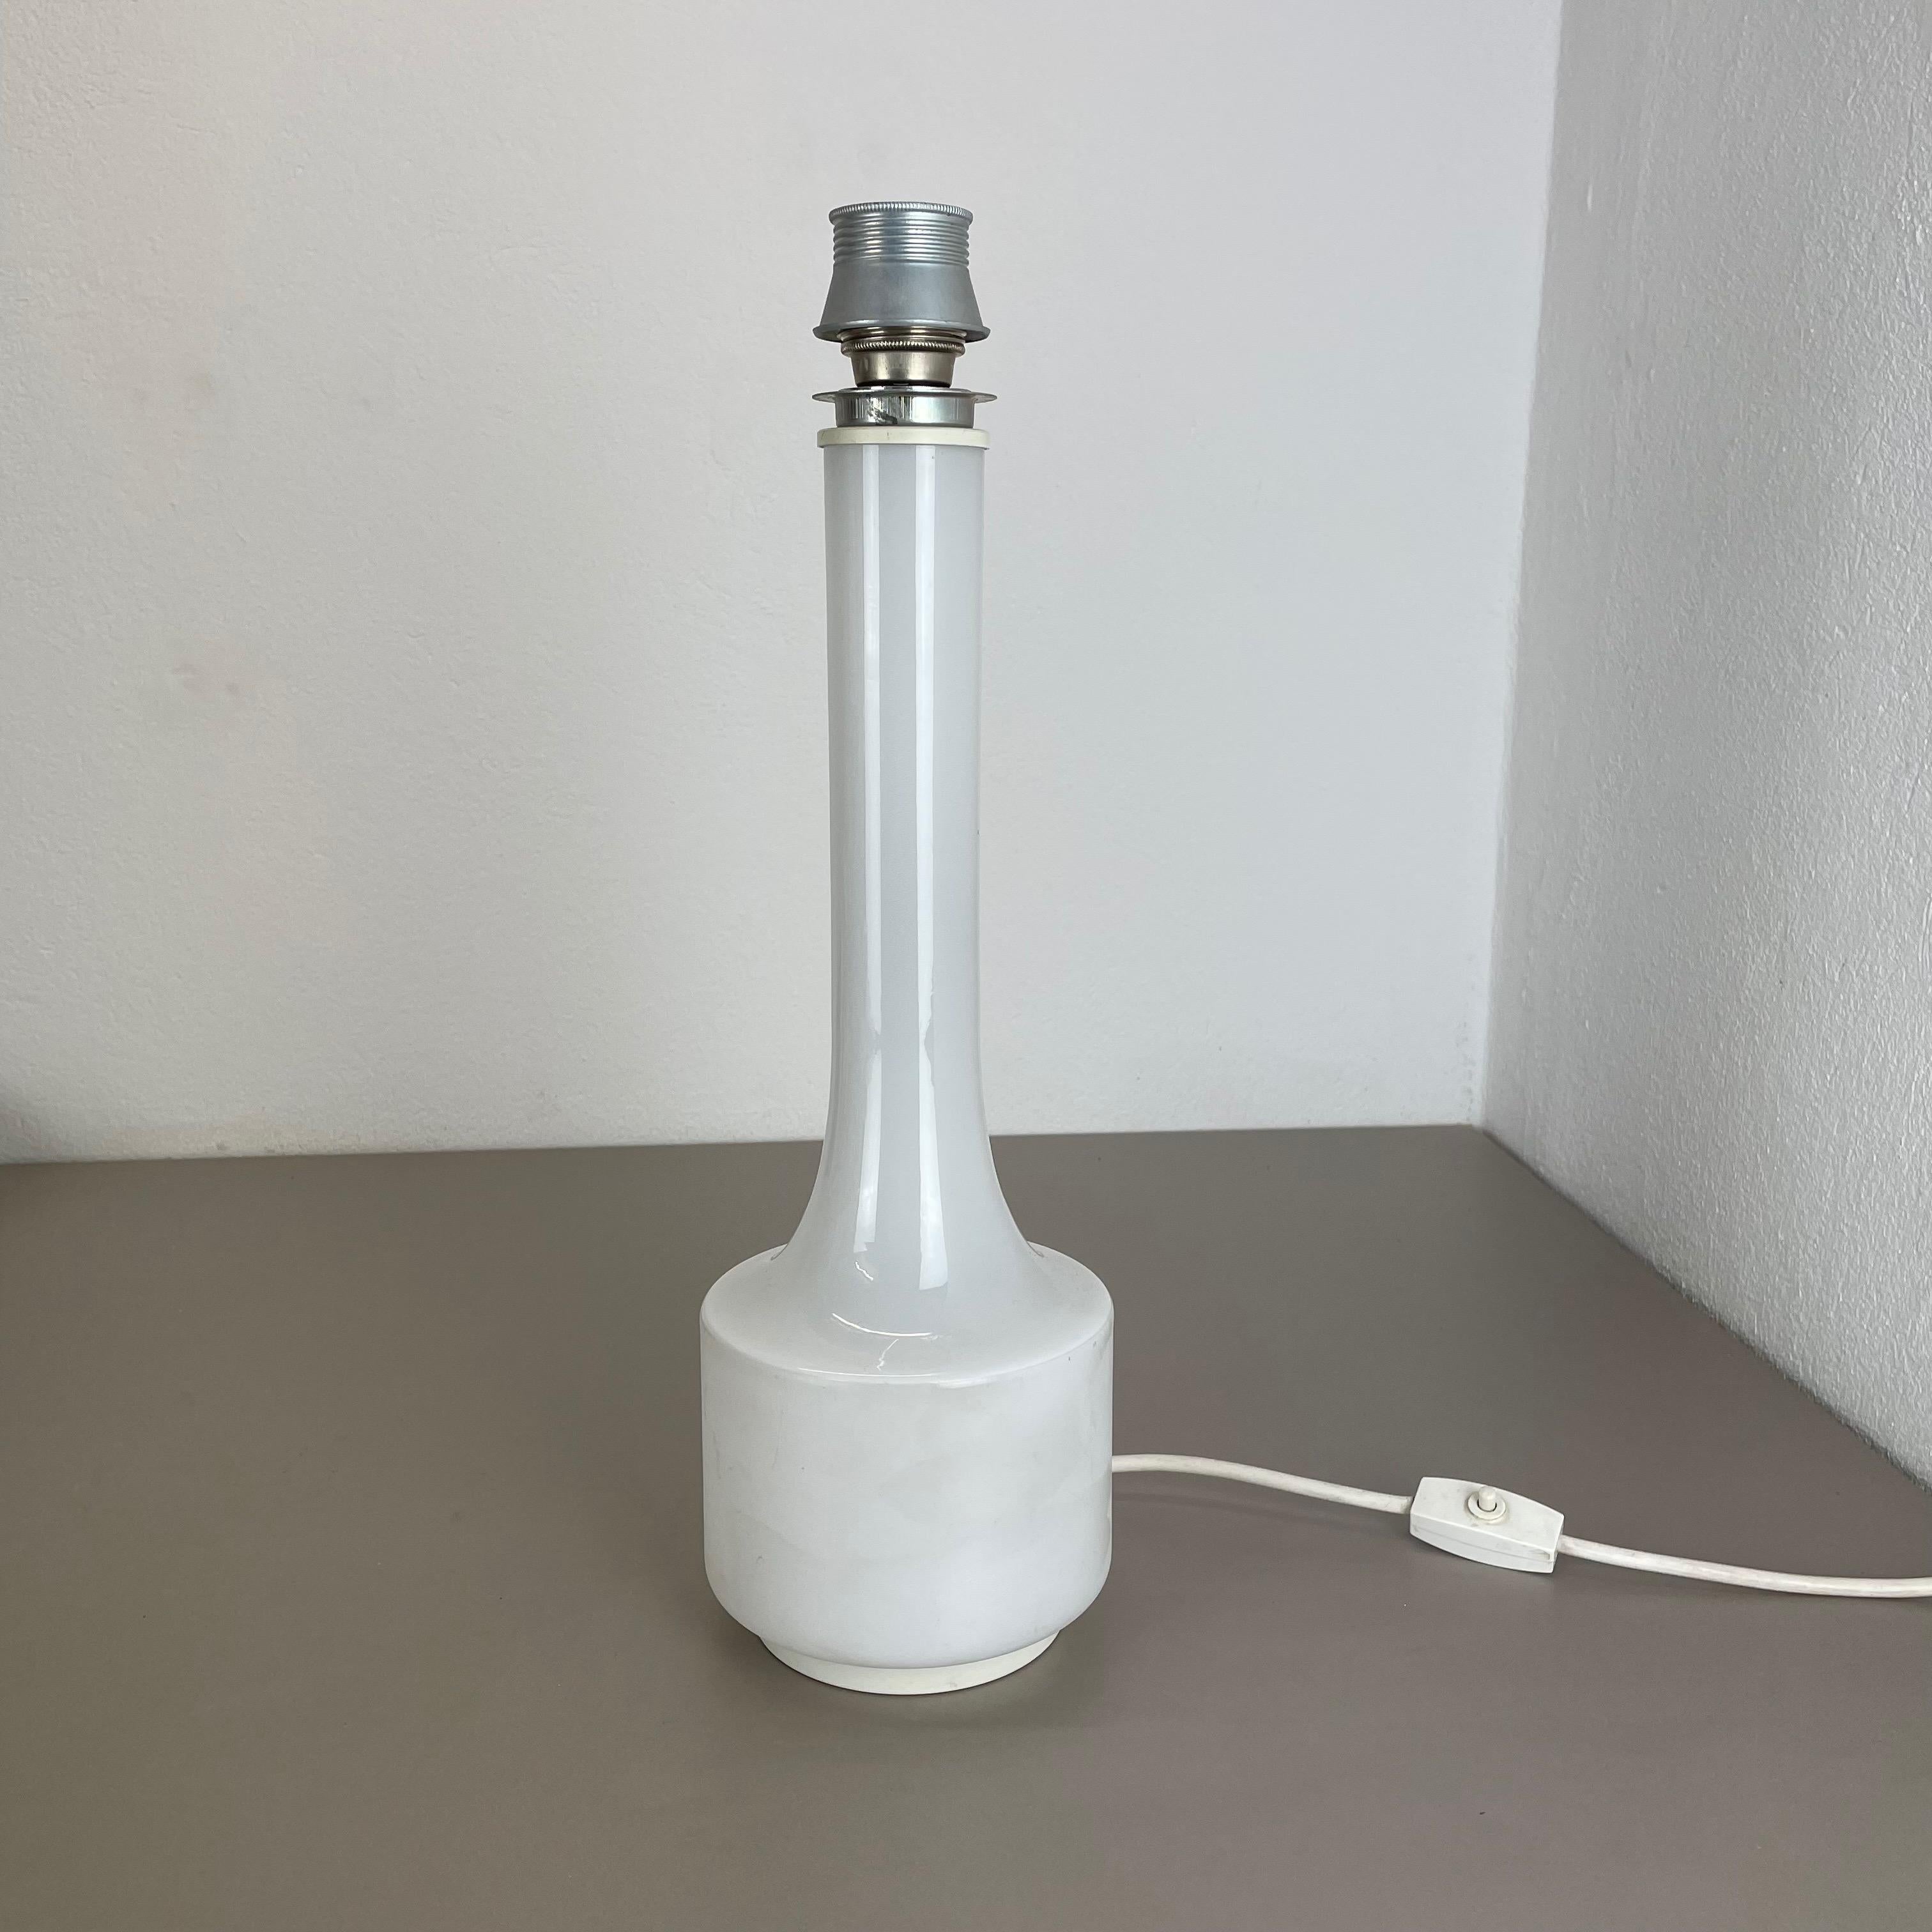 20th Century Modernist White Satin Glass Table Light Base by Doria Lights, 1970s, Germany For Sale